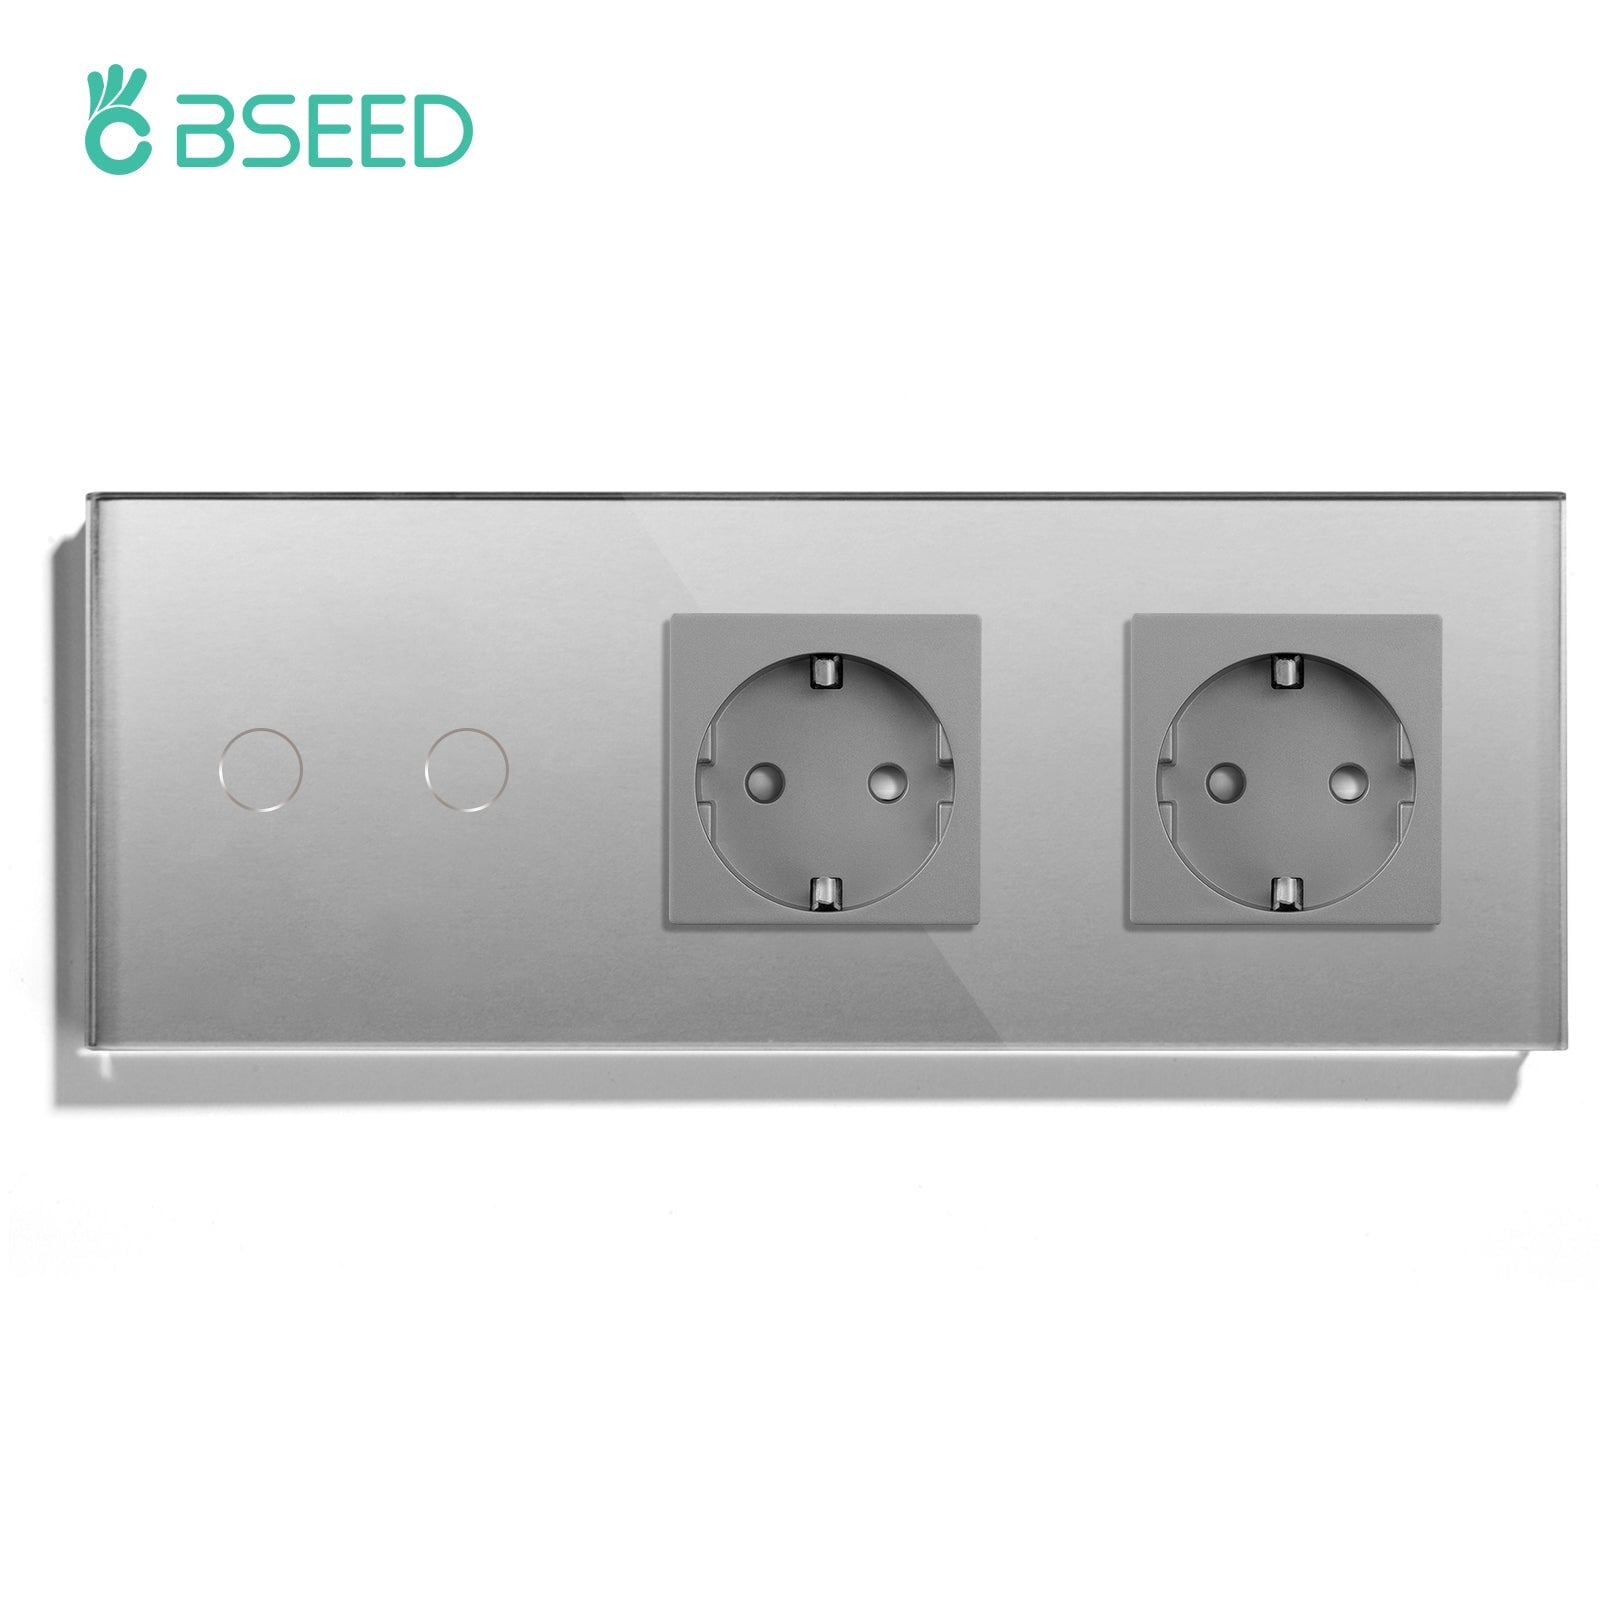 Bseed 1/2/3 Gang 1/2/3 Way Switch with Trible Socket Work Wall Plates & Covers Bseedswitch Grey 2 Gang 1way